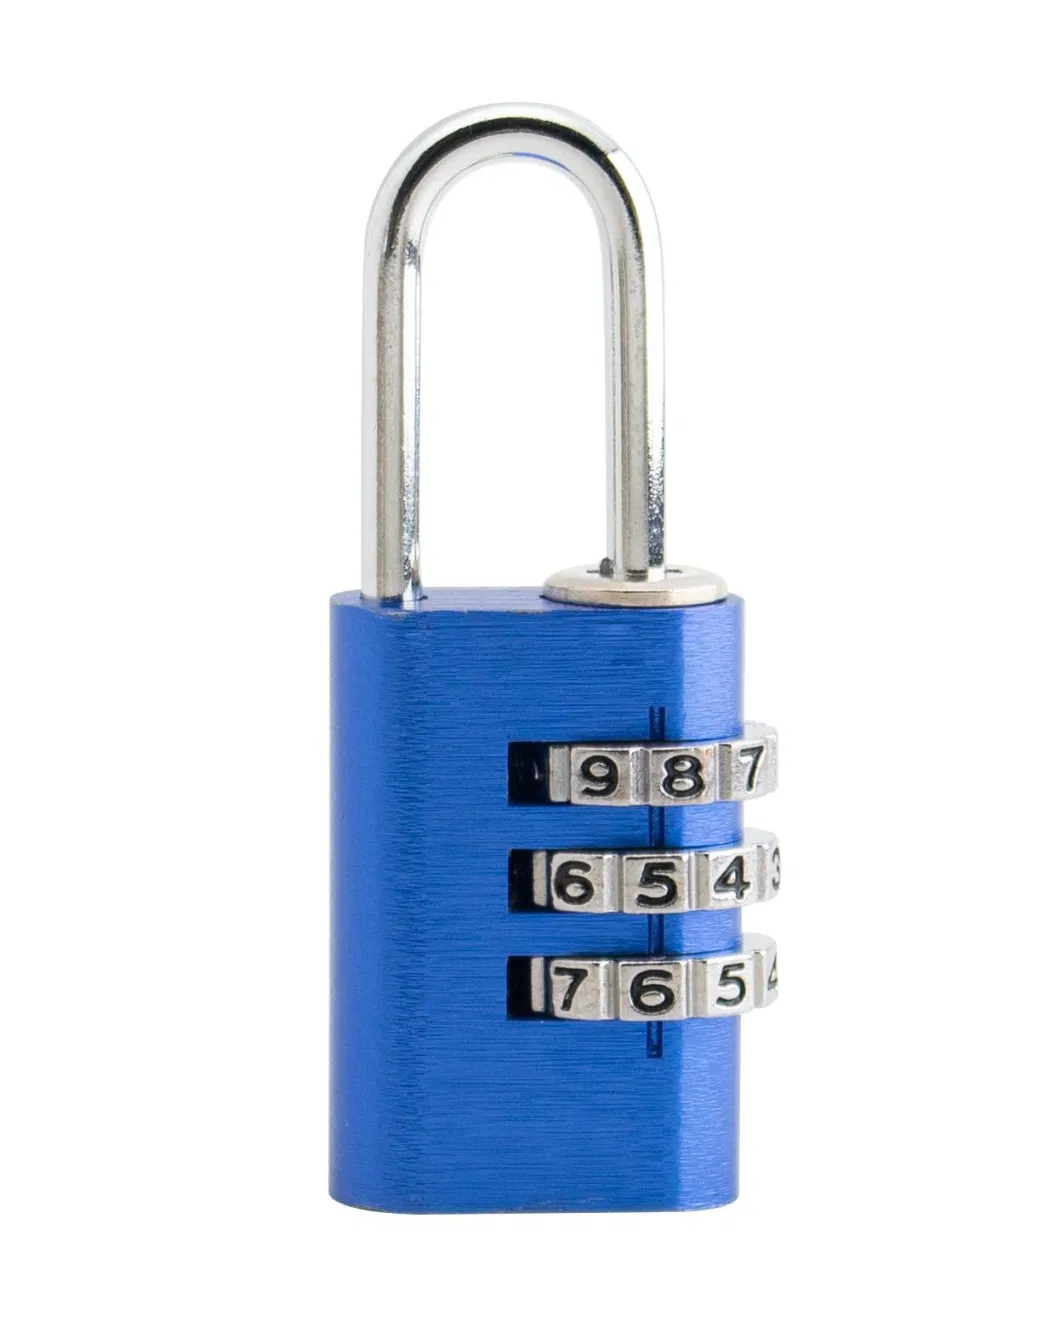 4 Digit Small Combination Padlock for Travel Luggage-Blue